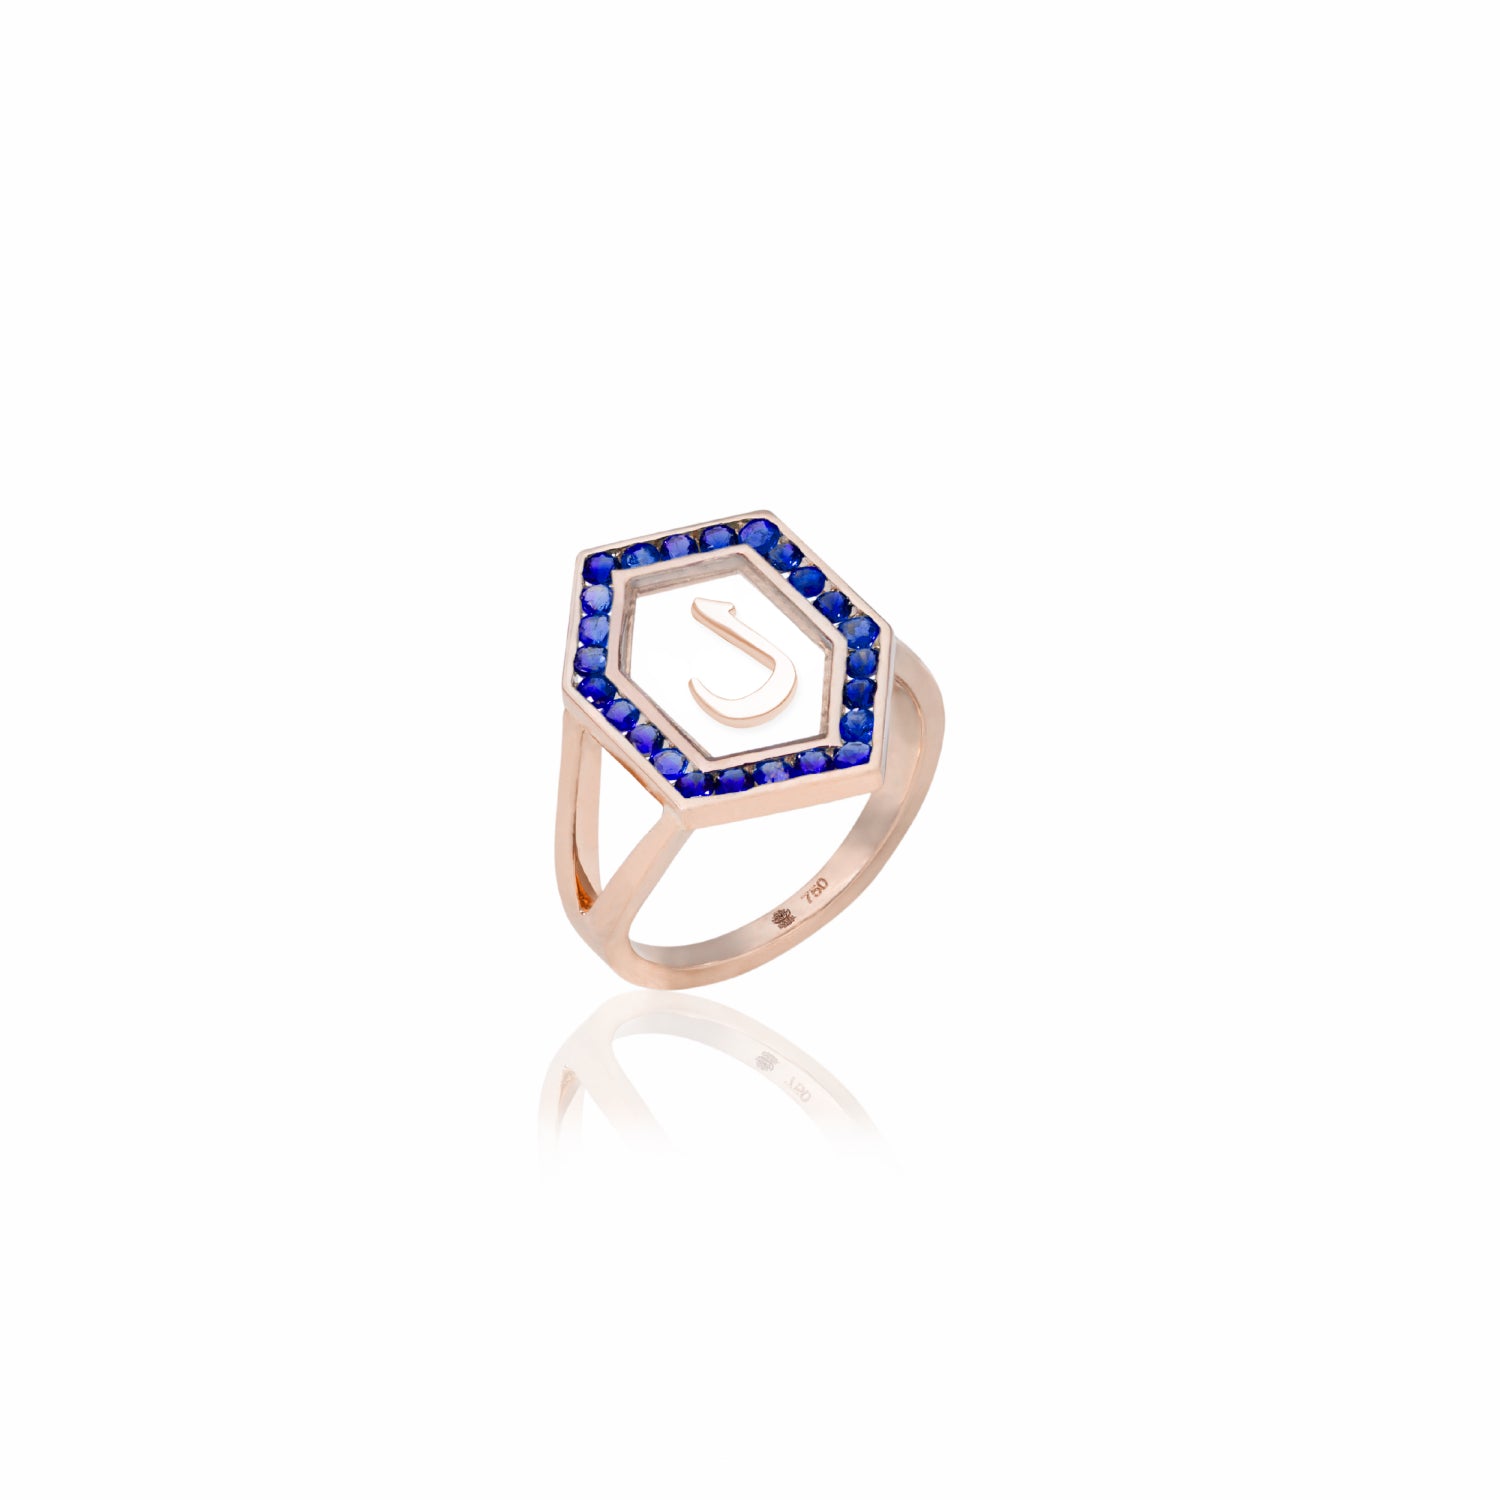 Qamoos 1.0 Letter ل Sapphire Ring in Rose Gold